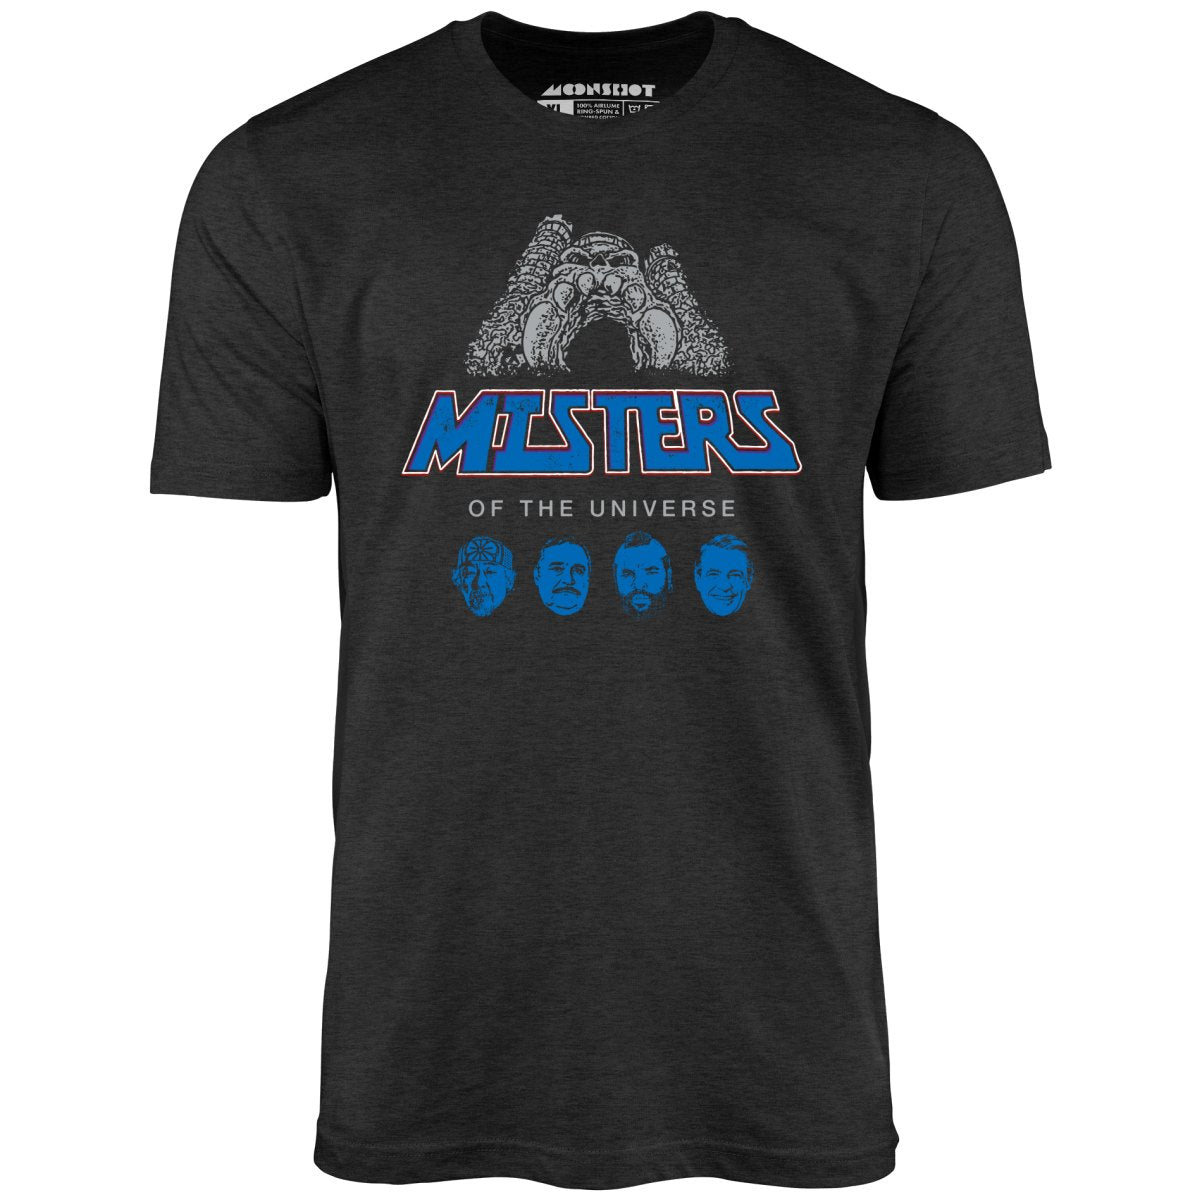 Misters of The Universe - Unisex T-Shirt